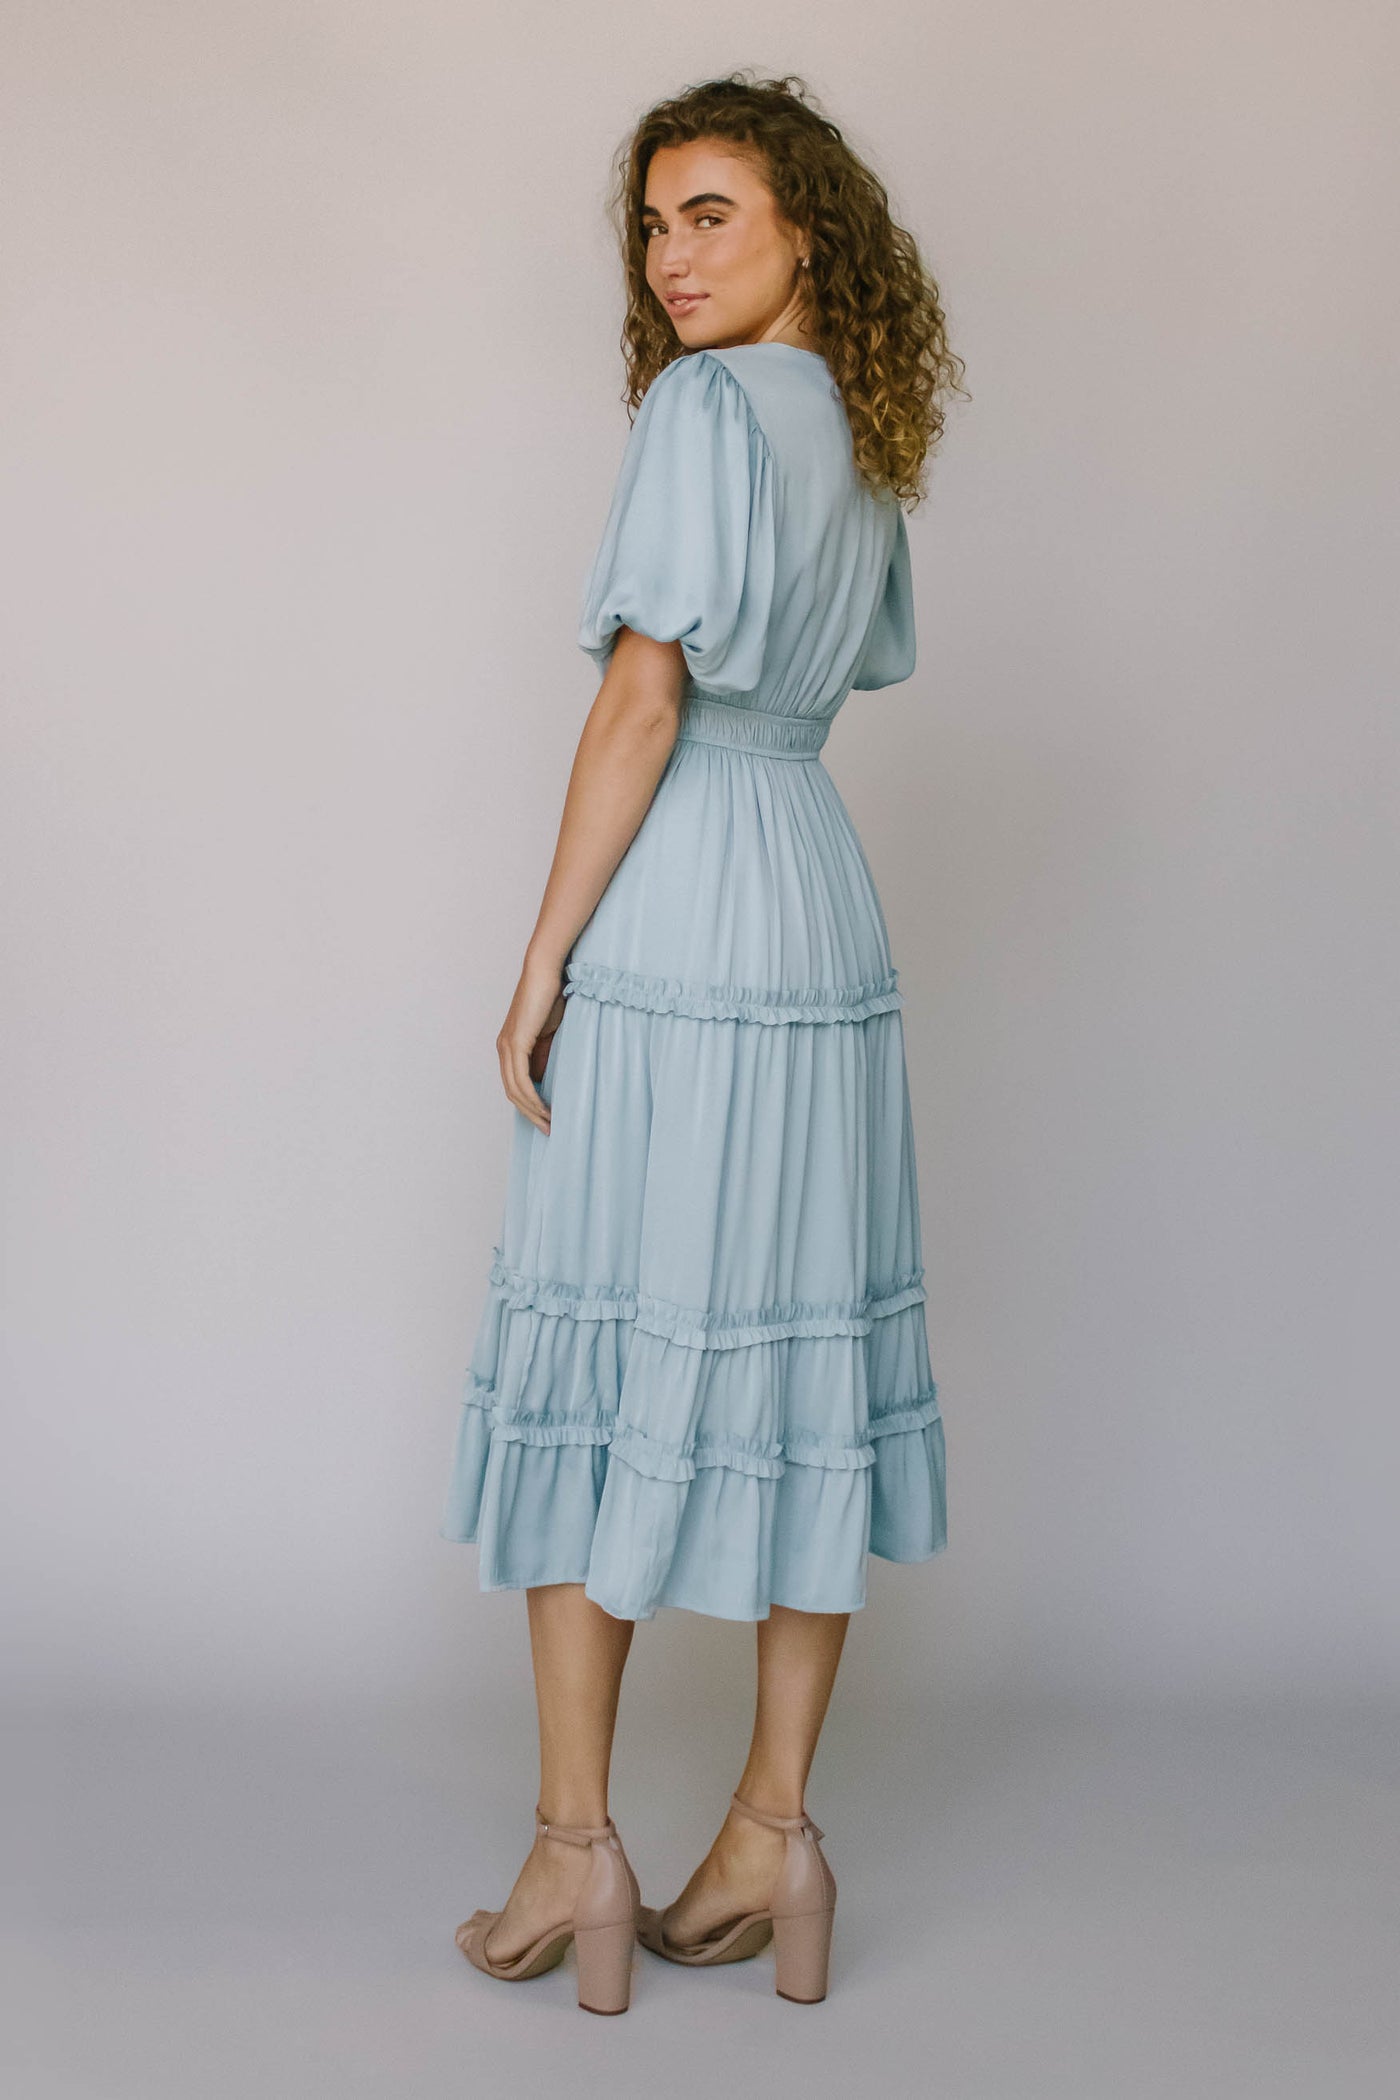 The back of a modest dress in French blue with puff sleeves, ruffled tiers, a defined waistline, and puff sleeves.